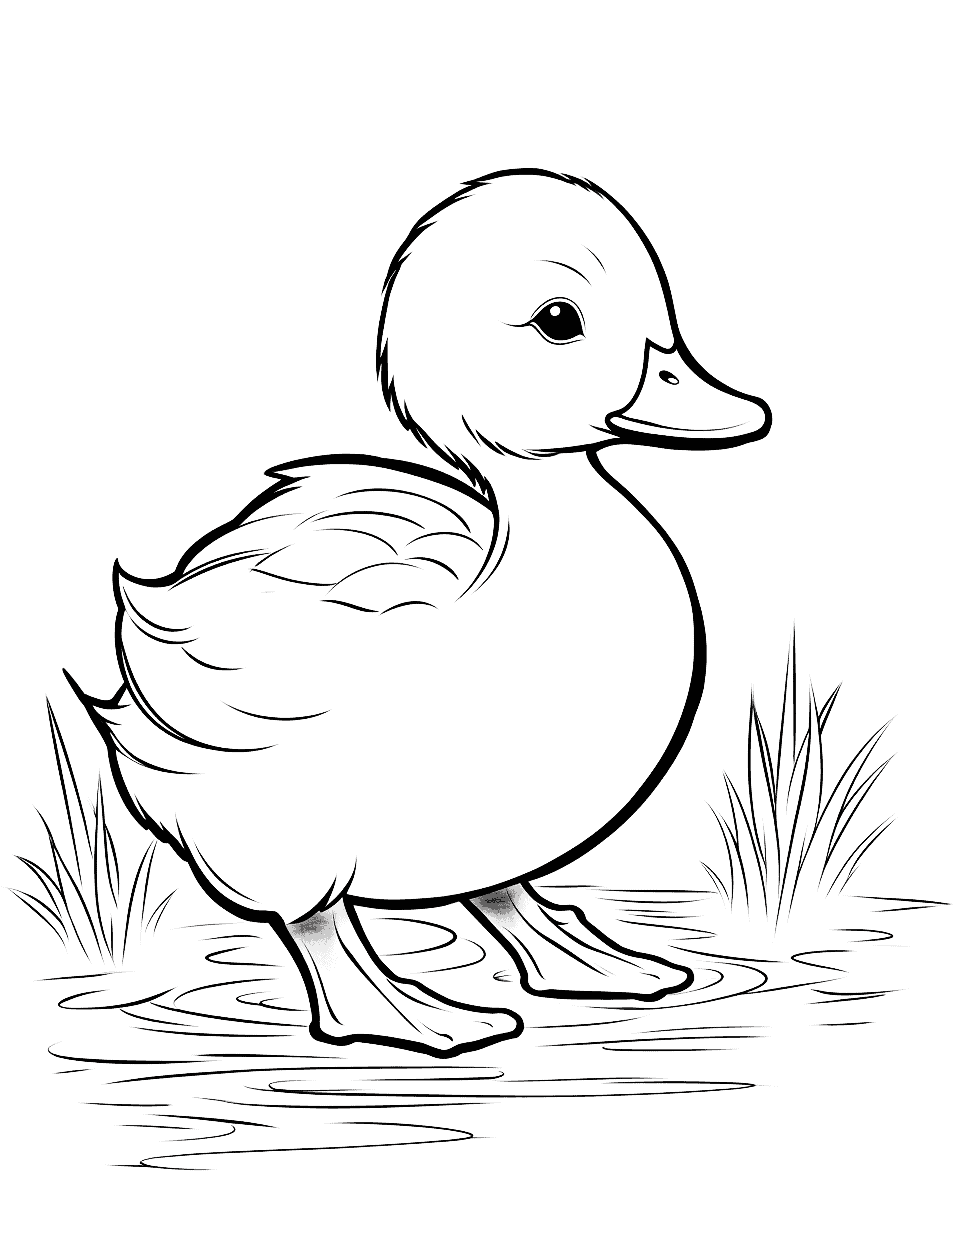 Fluffy Duck Animal Coloring Page - A fluffy duckling with soft feathers floating in a pond.